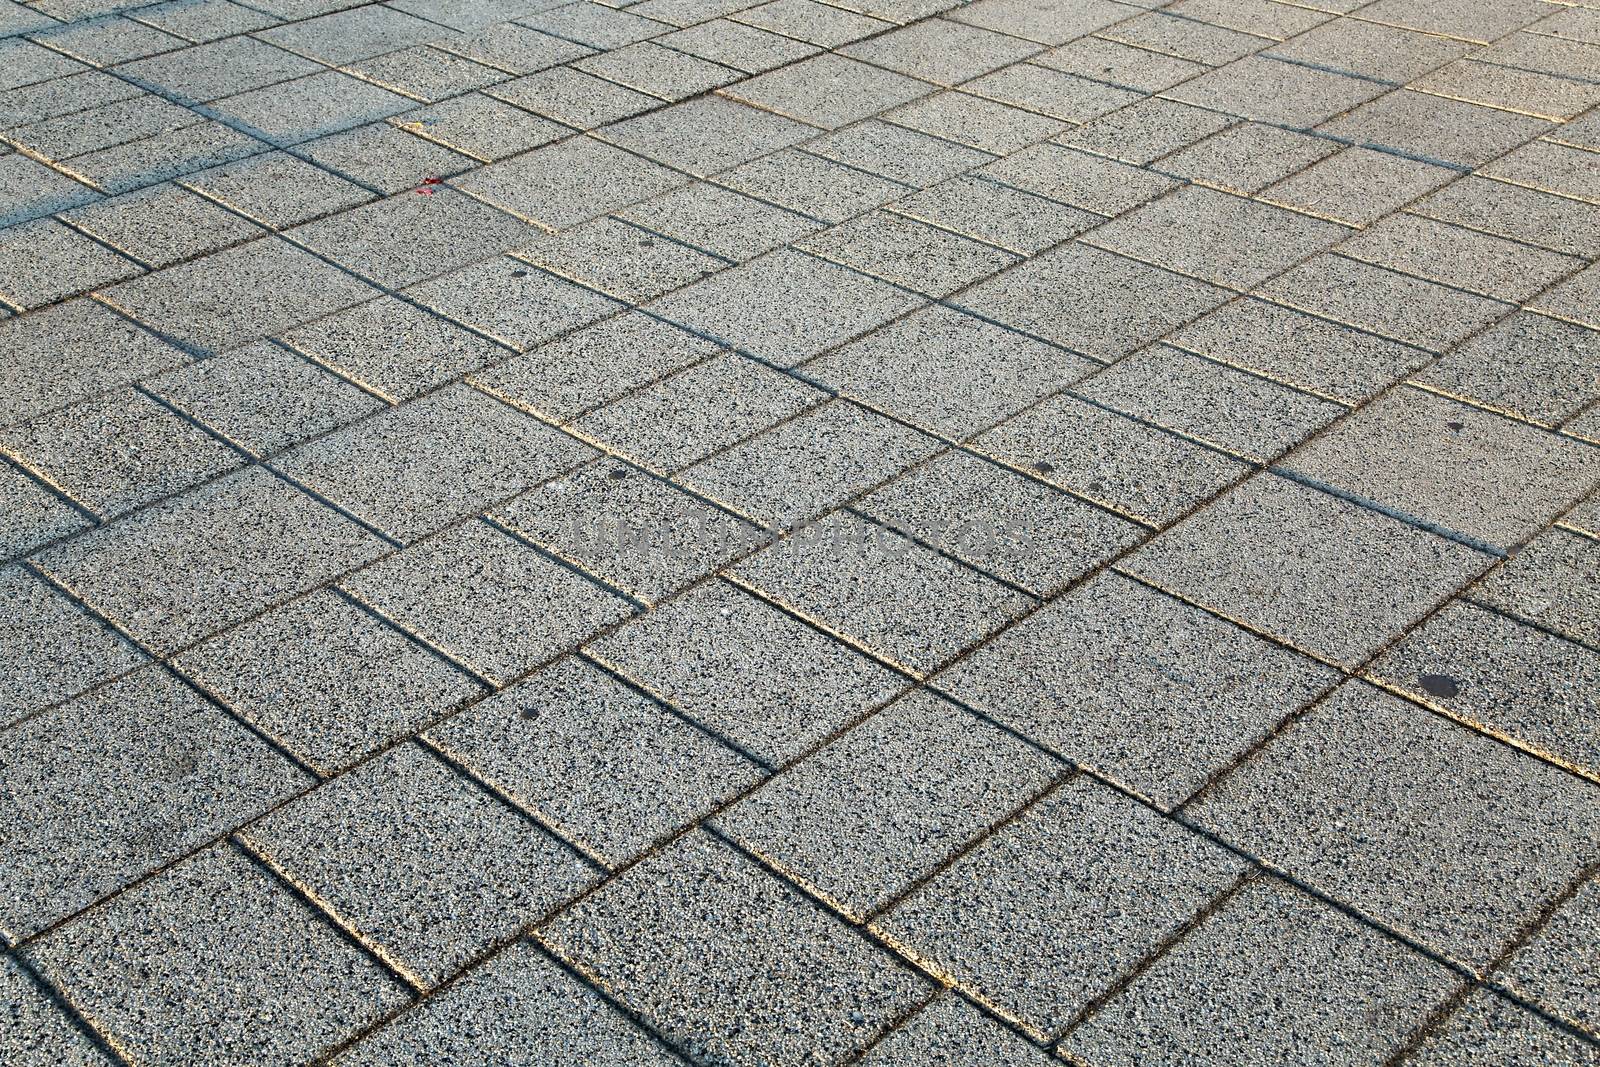 Pavement made of old stones